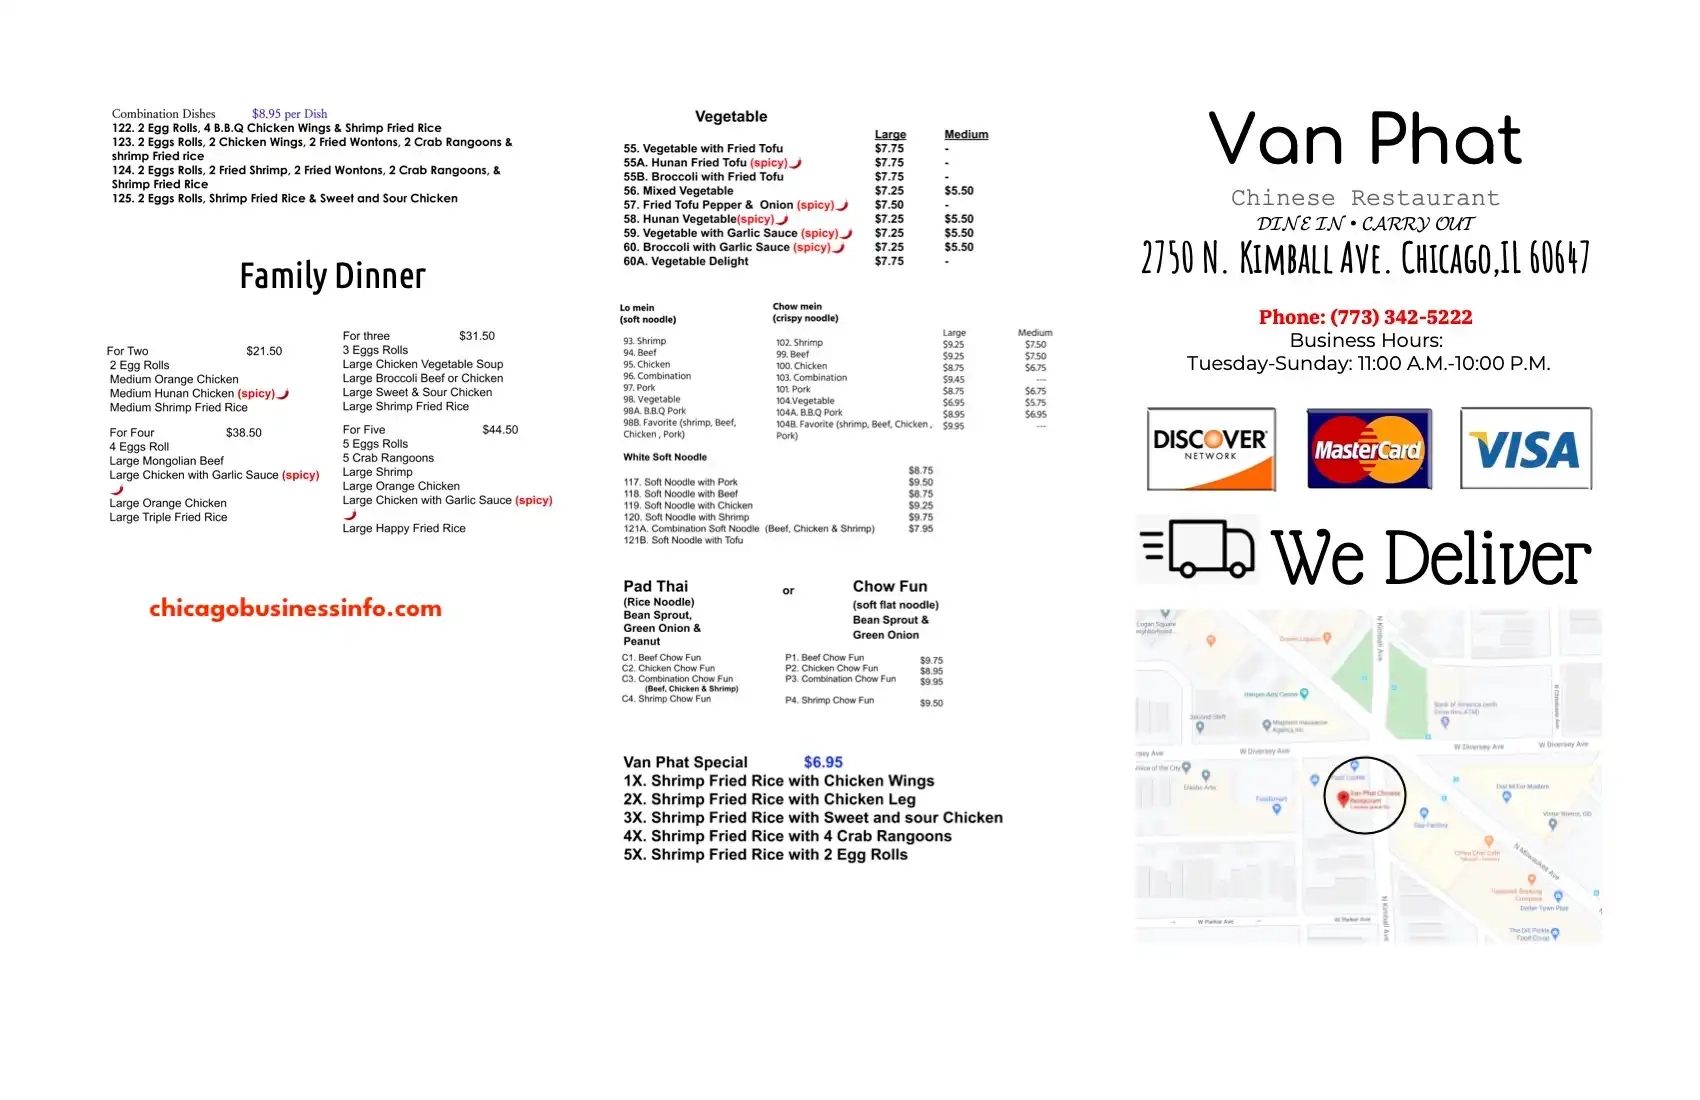 Van Phat Chinese Restaurant Chicago Carry Out Menu 1